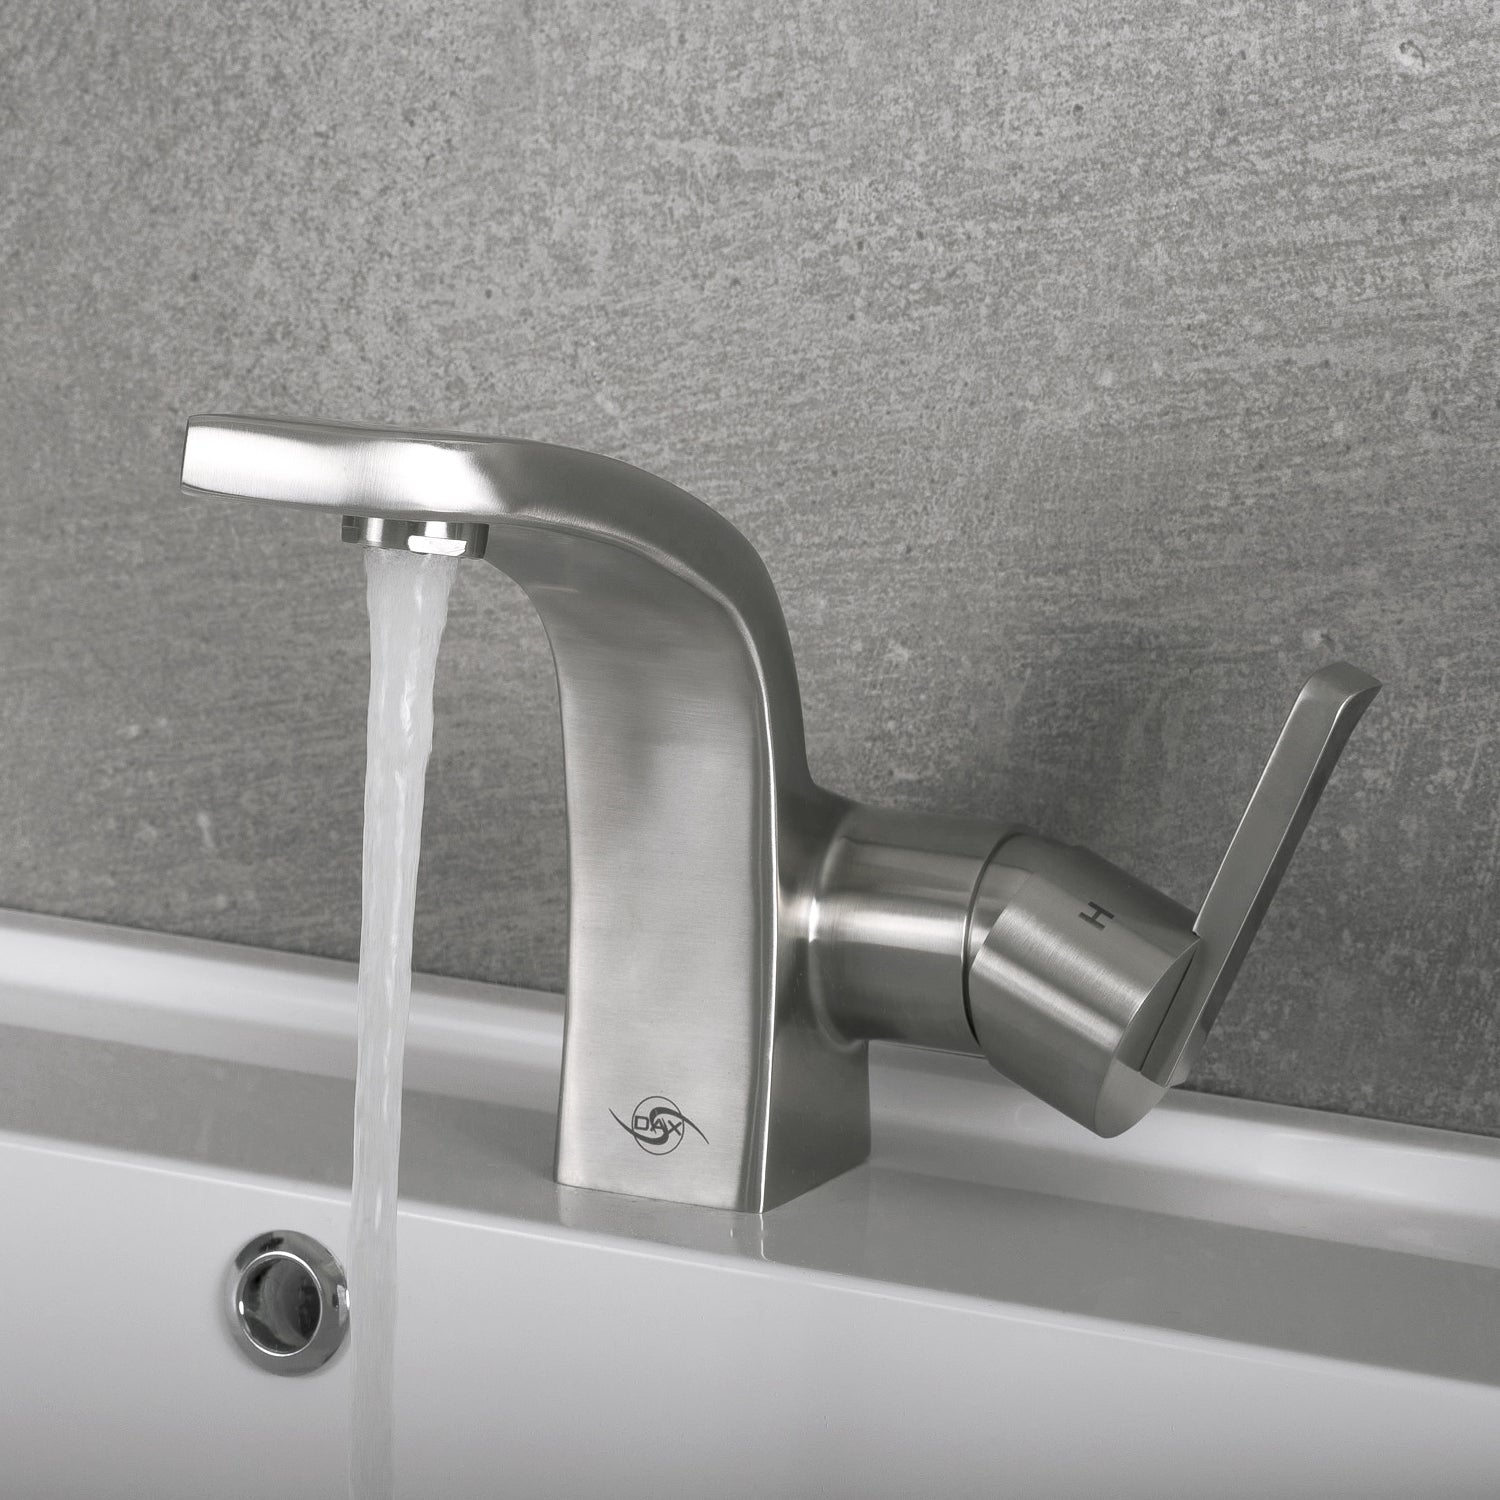 DAX Single Handle Bathroom Faucet, Stainless Steel Body, Brushed Finish, 4-13/16 x 6-1/16 Inches (DAX-010-05)